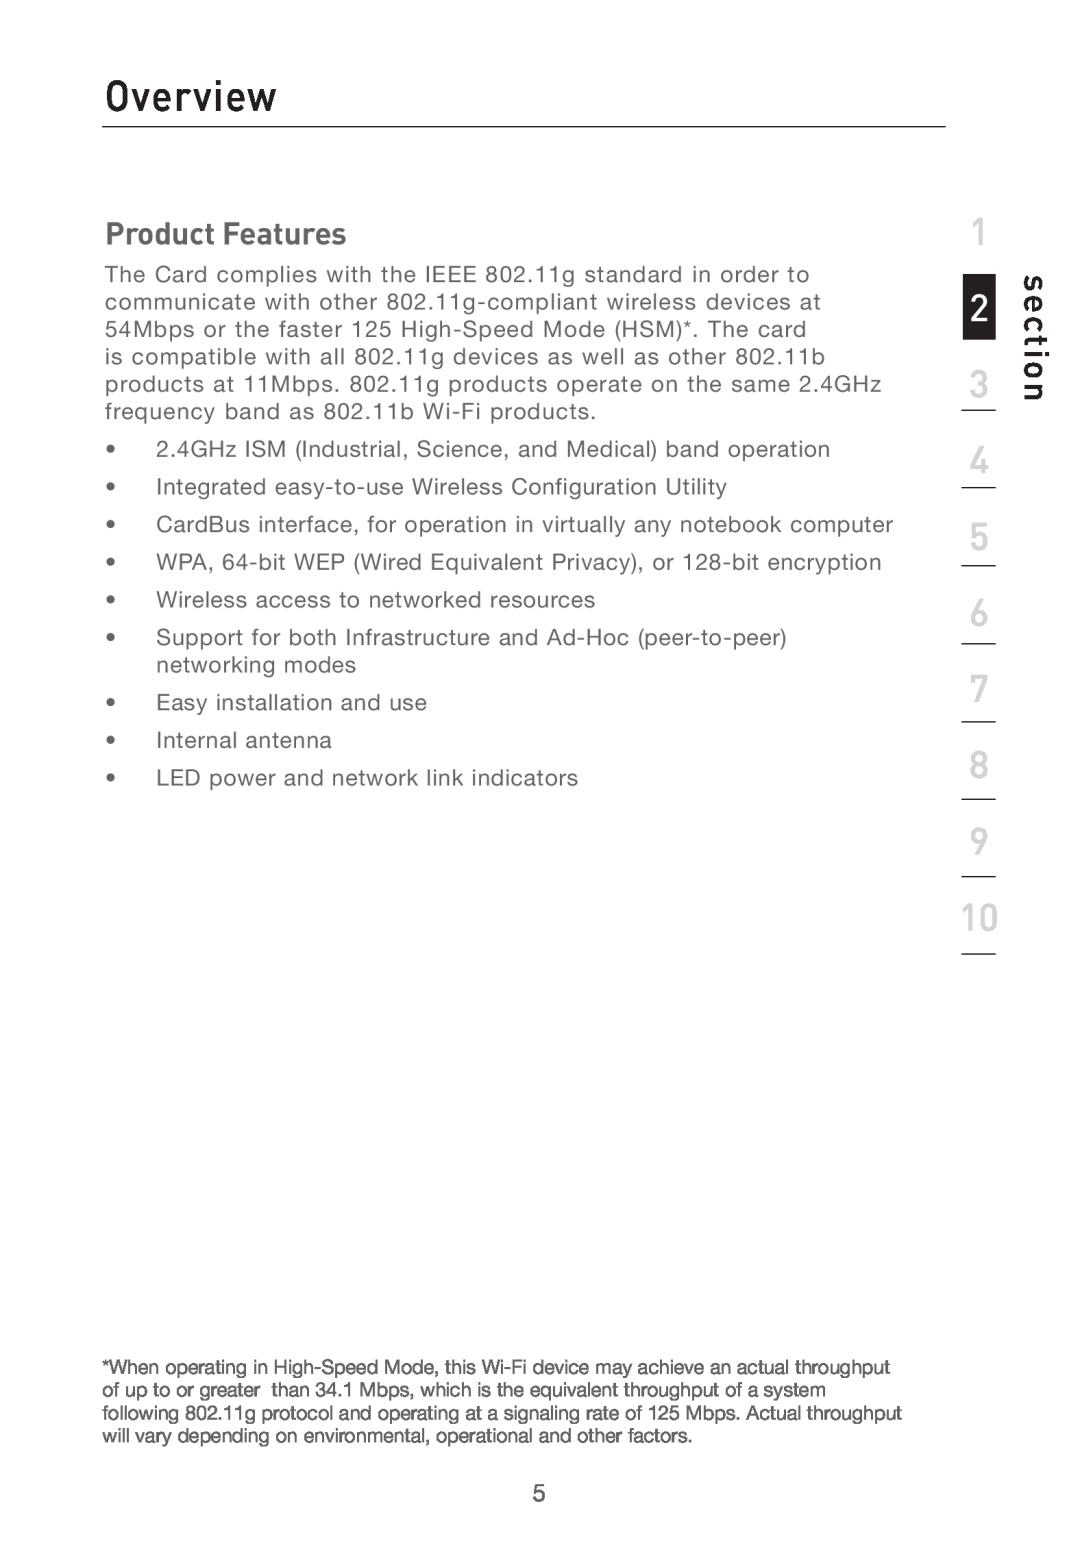 Belkin F5D7011 manual Overview, Product Features, section 